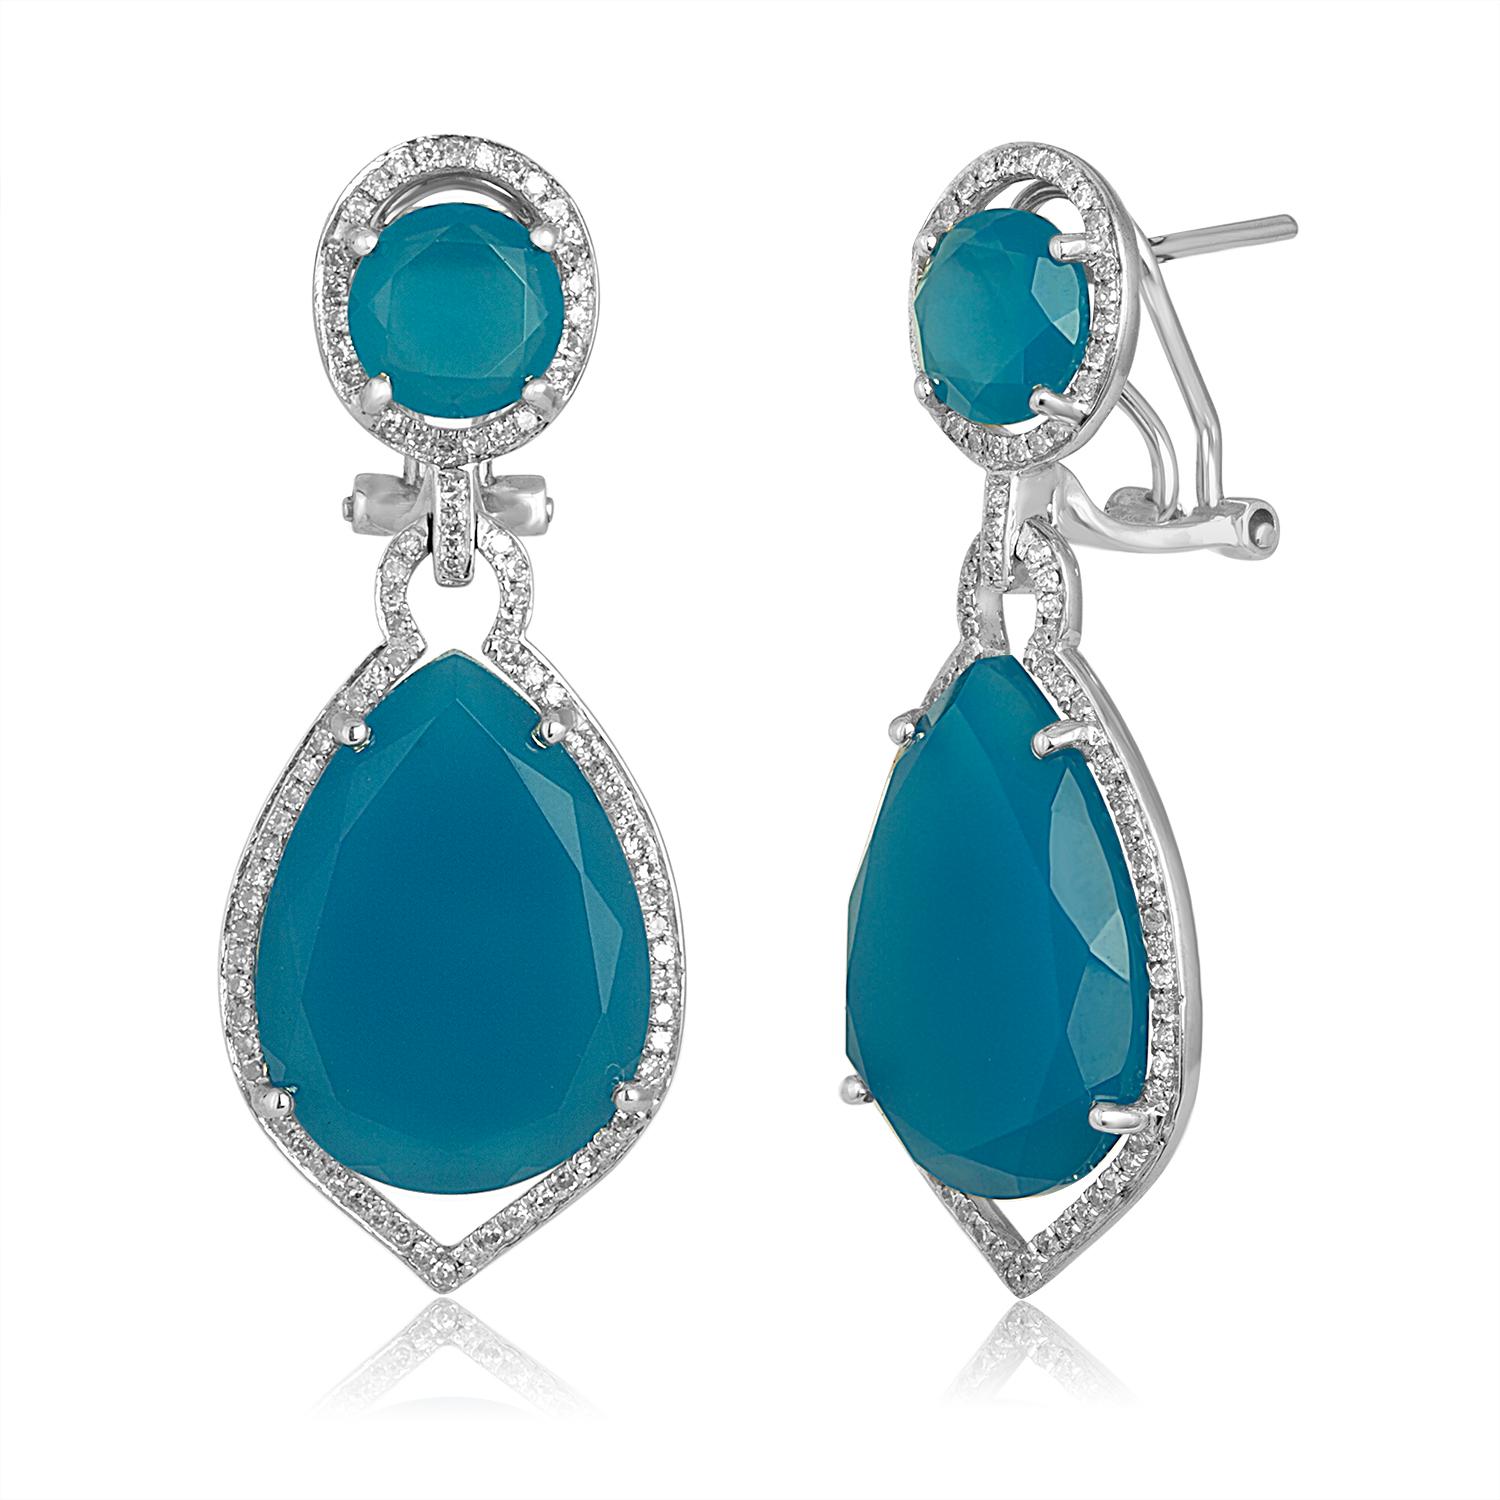 Very Fun Blue Colored Agate Earrings
The earrings are 14K White Gold.
There are 0.44ct in G/H SI Diamonds.
There are 19.21ct in Blue Agate.
The earrings measure 1.5